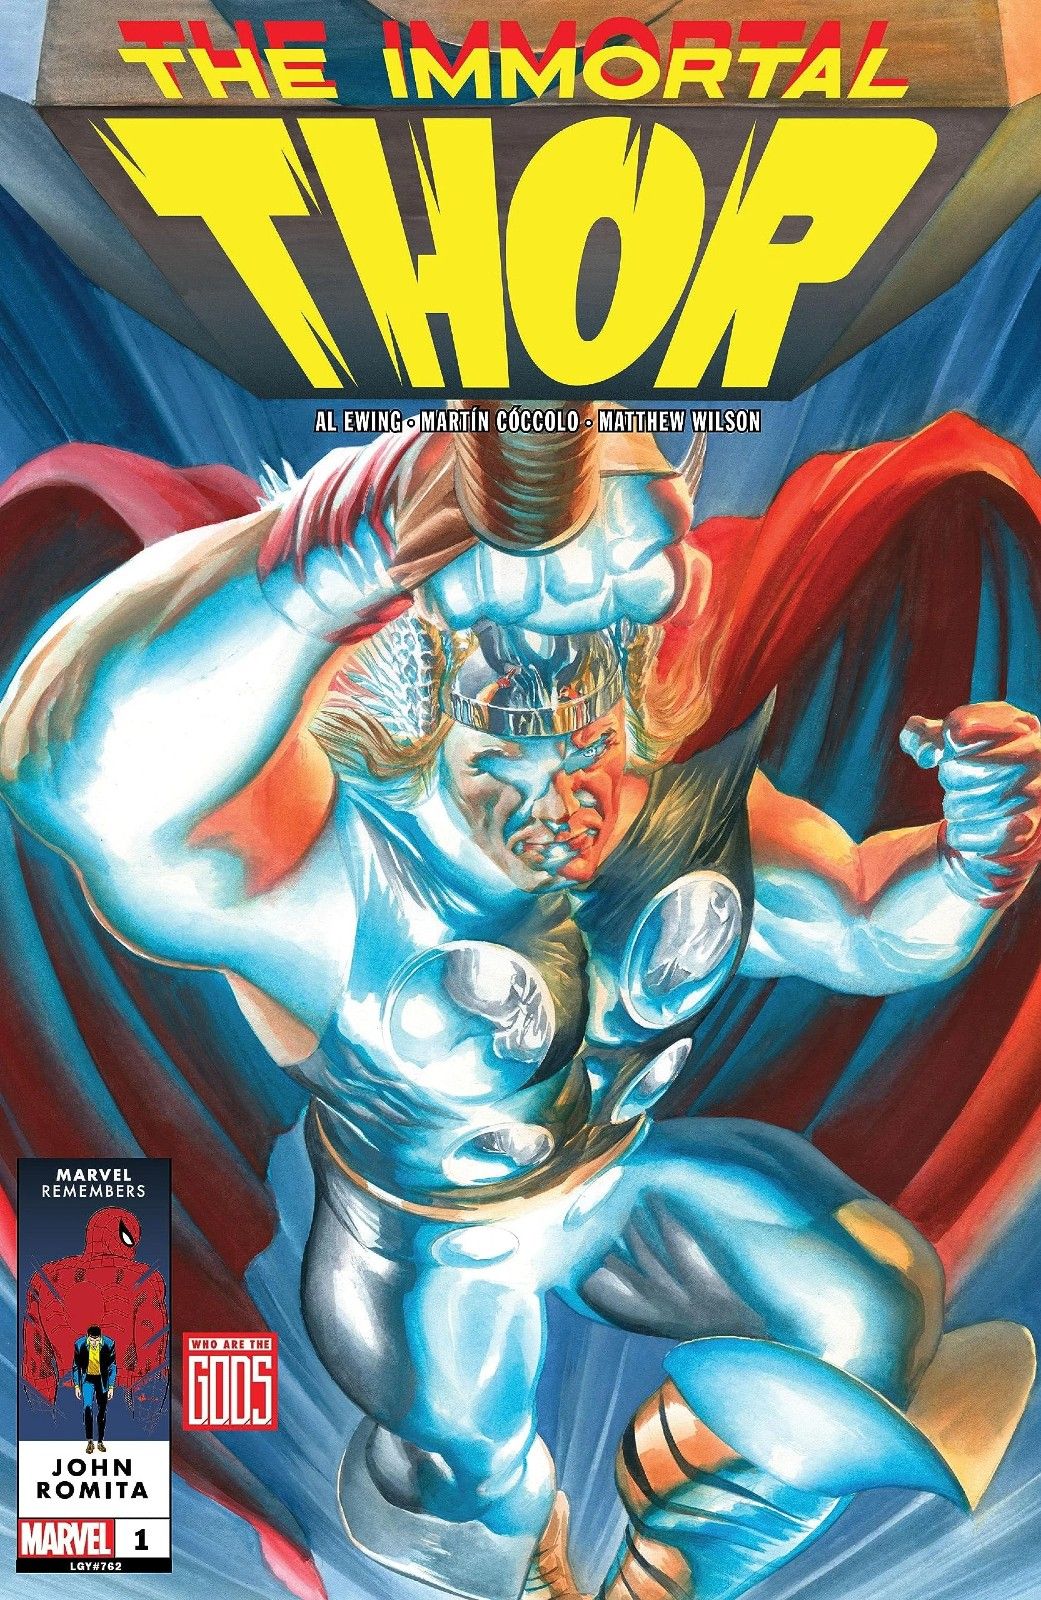 A stylized version of Thor flies with Mjolnir in Immortal Thor #1 by Marvel Comics